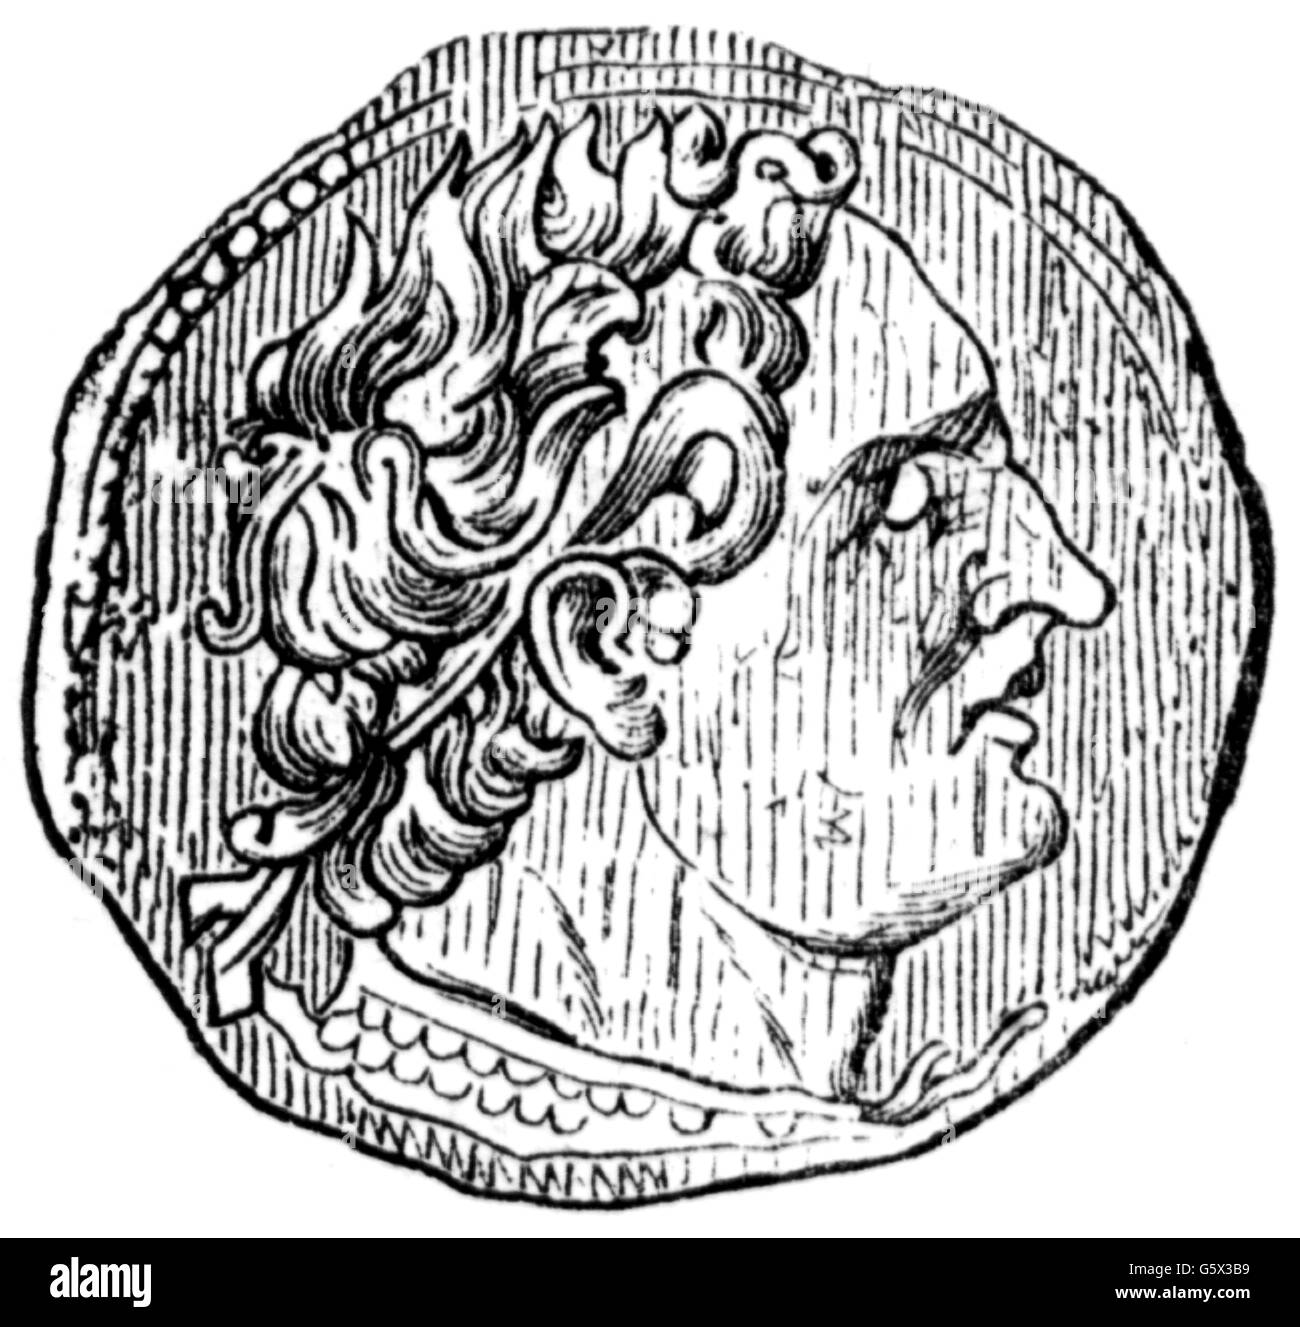 Ptolemy I Soter (c. 367 BC – 282 BC) - ART for Everyone